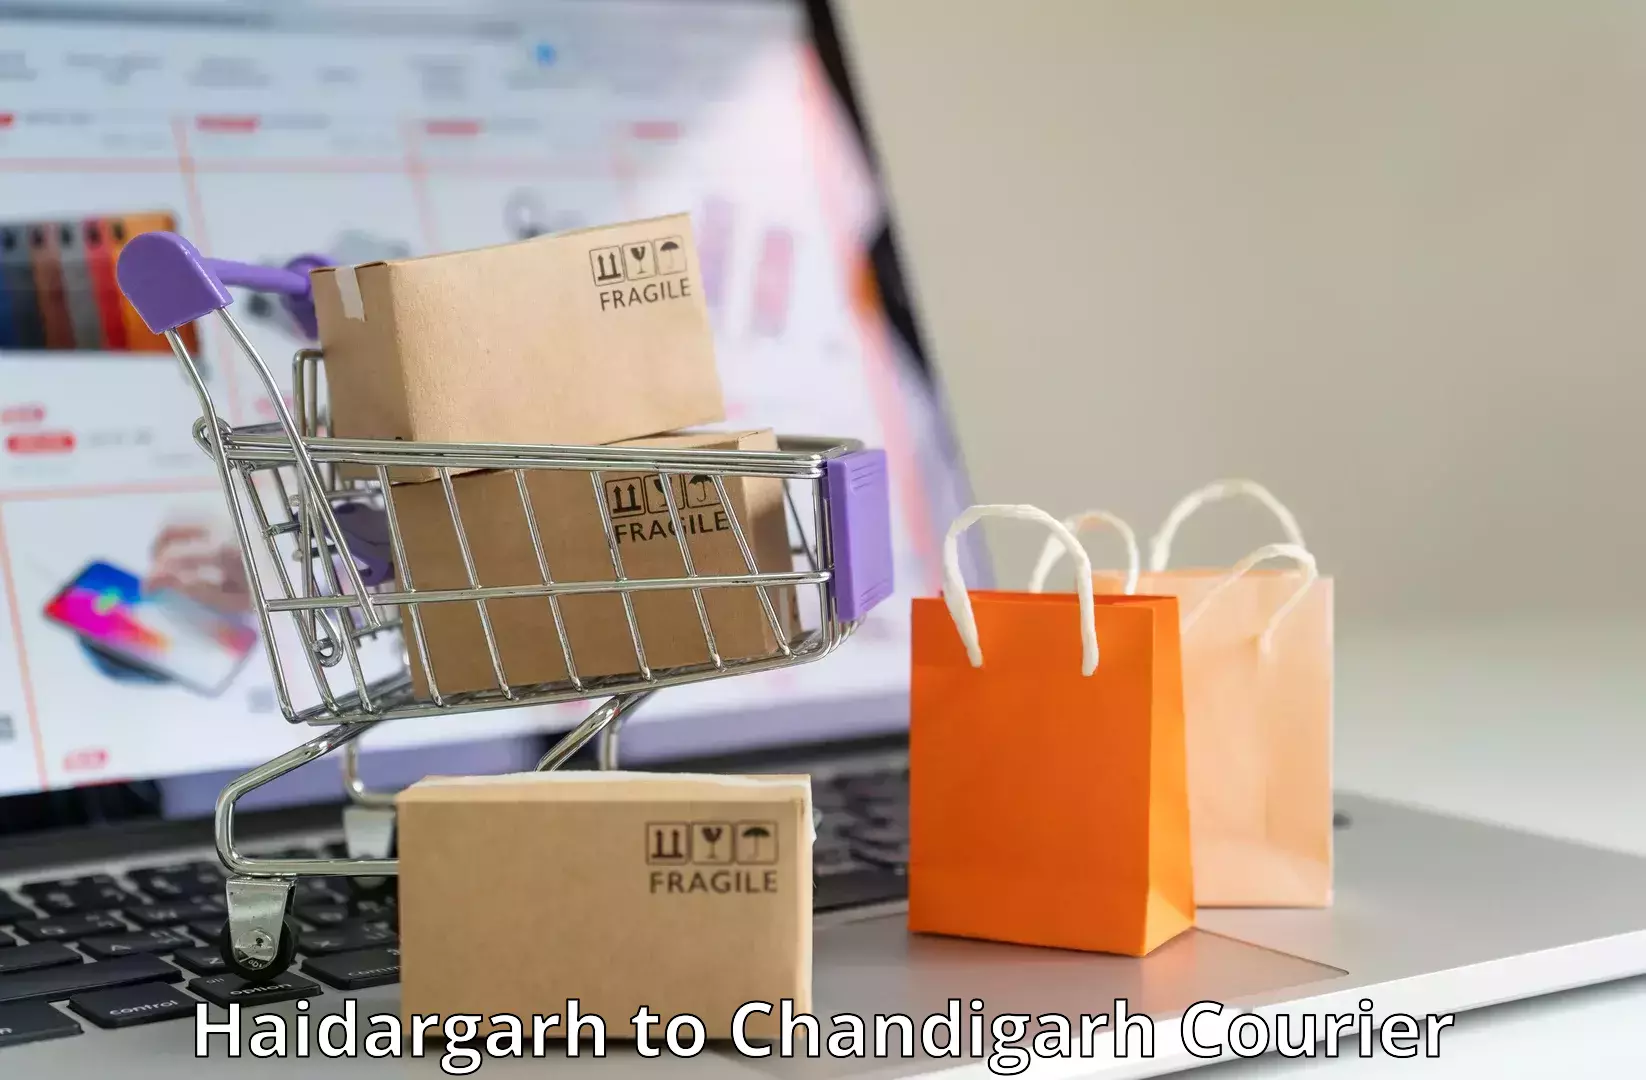 Innovative courier solutions Haidargarh to Chandigarh